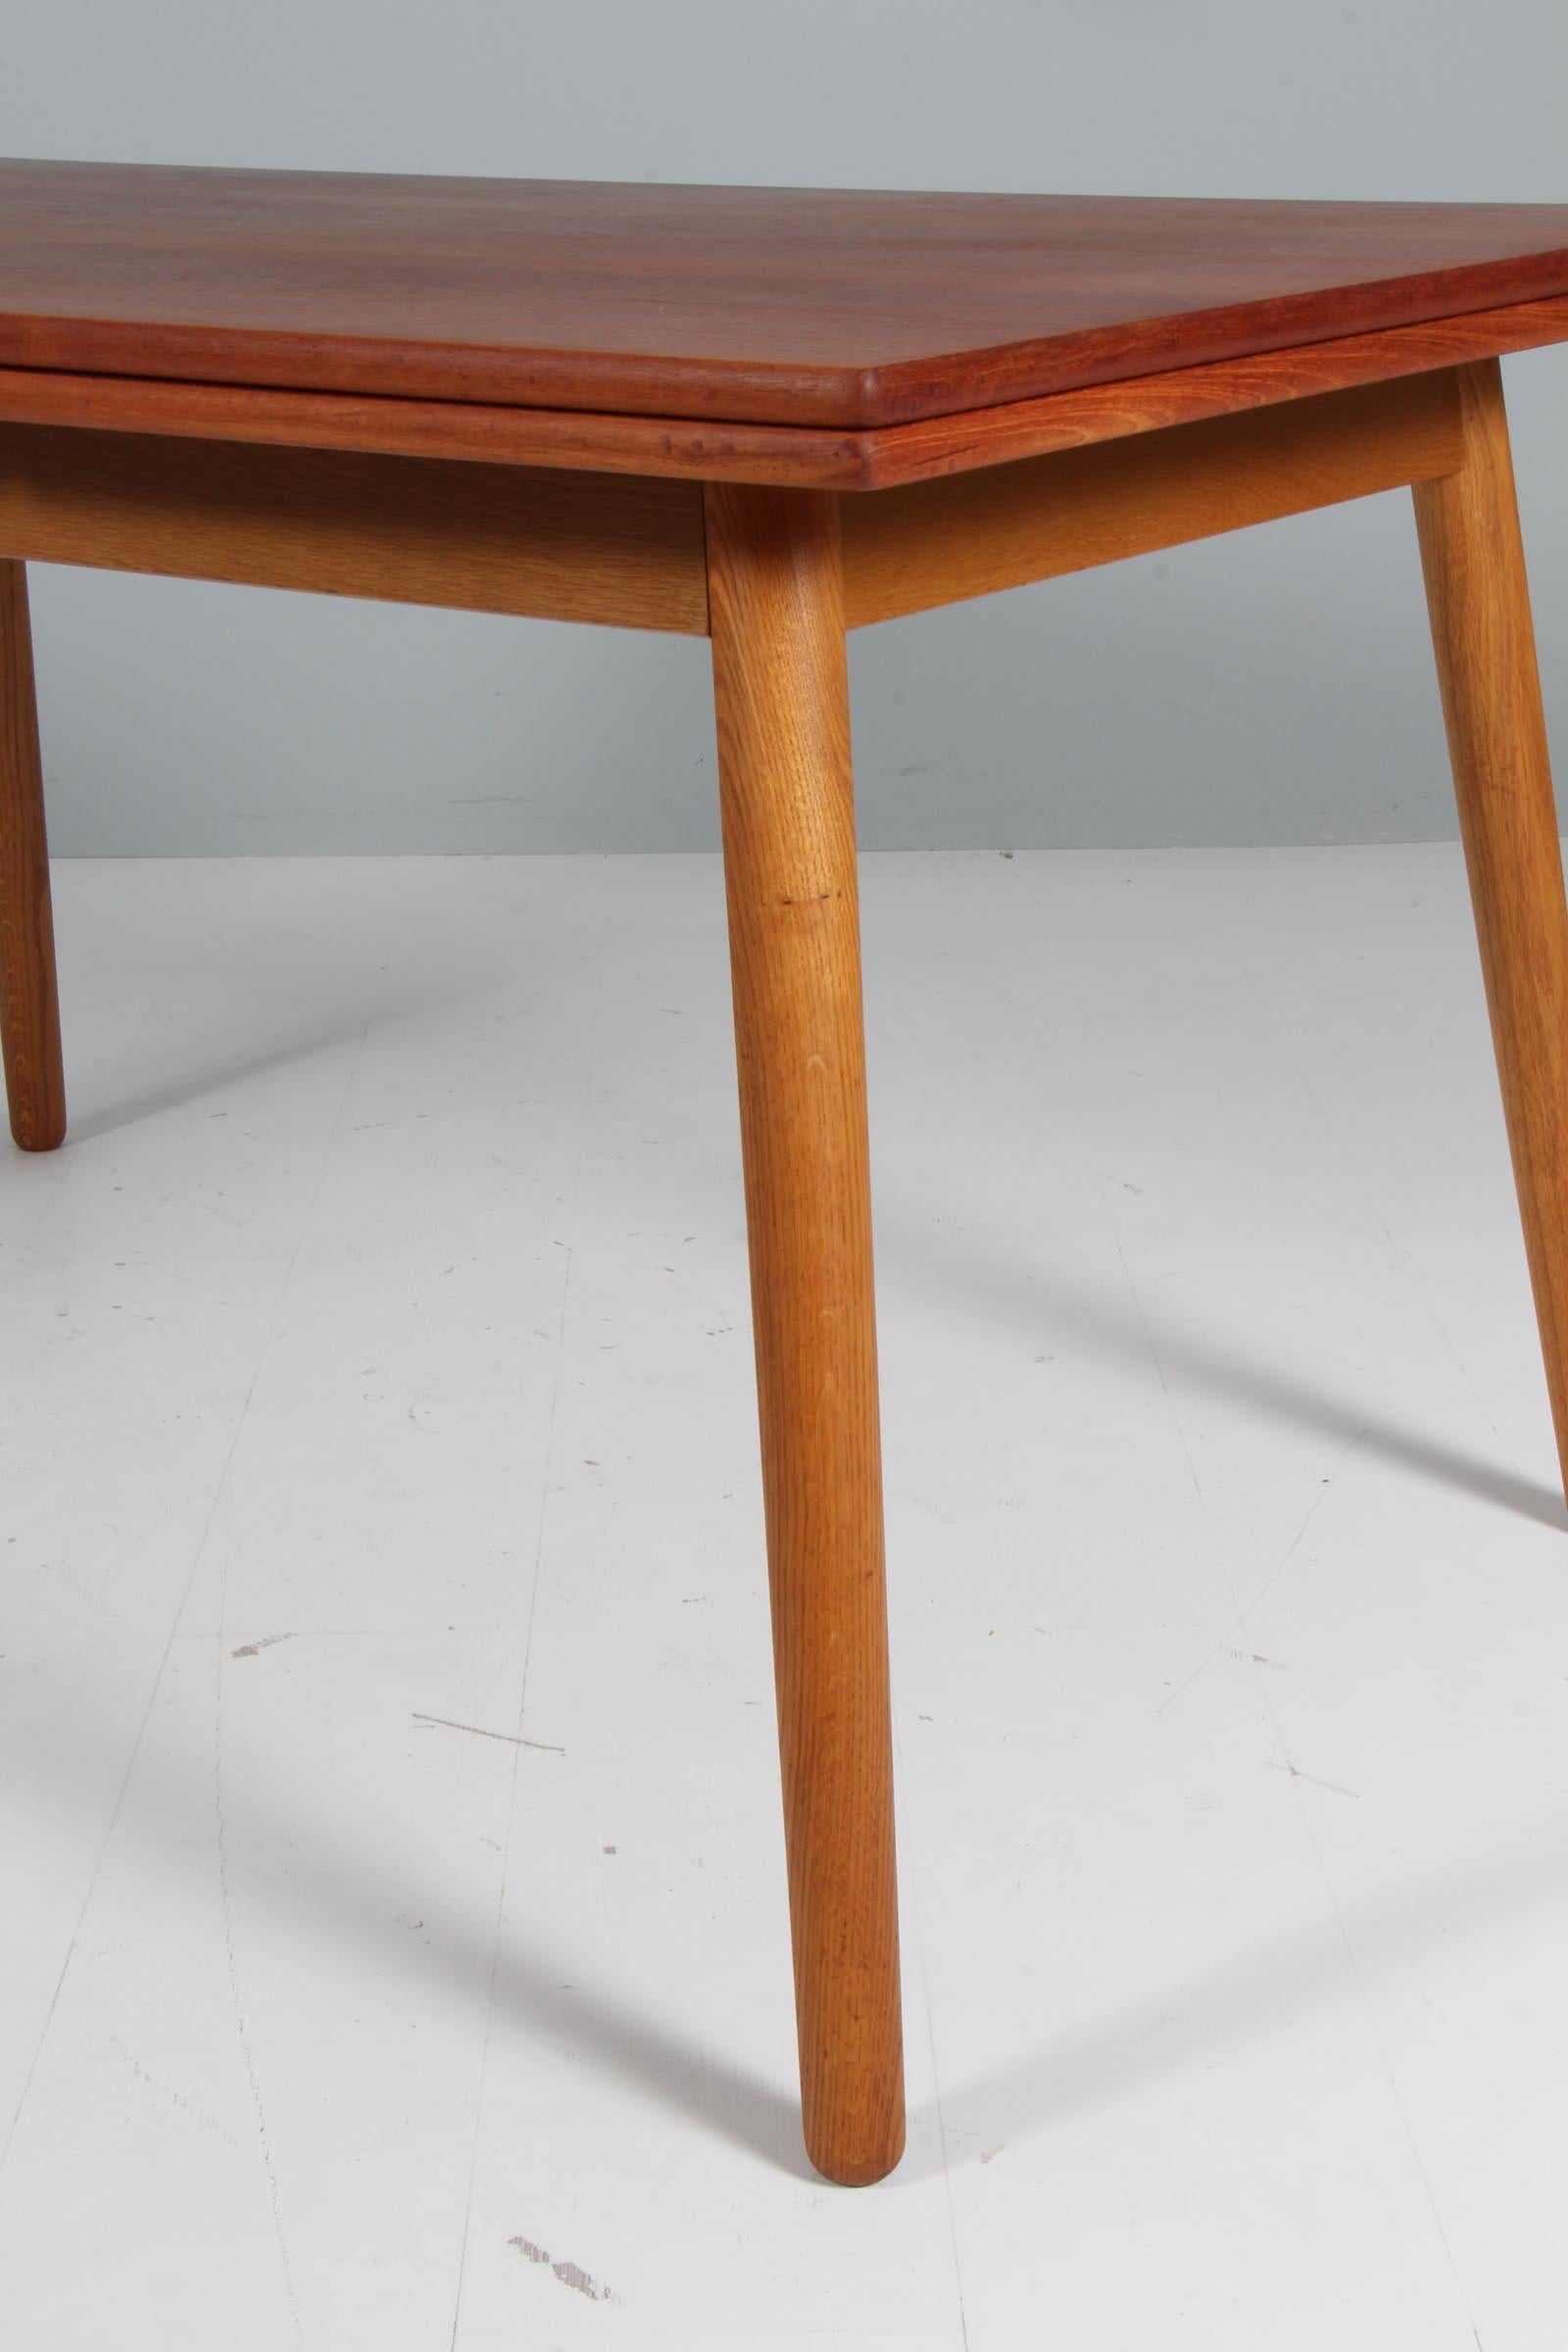 Danish Poul Volther for FDB dining table in teak and oak, extension leafes. For Sale